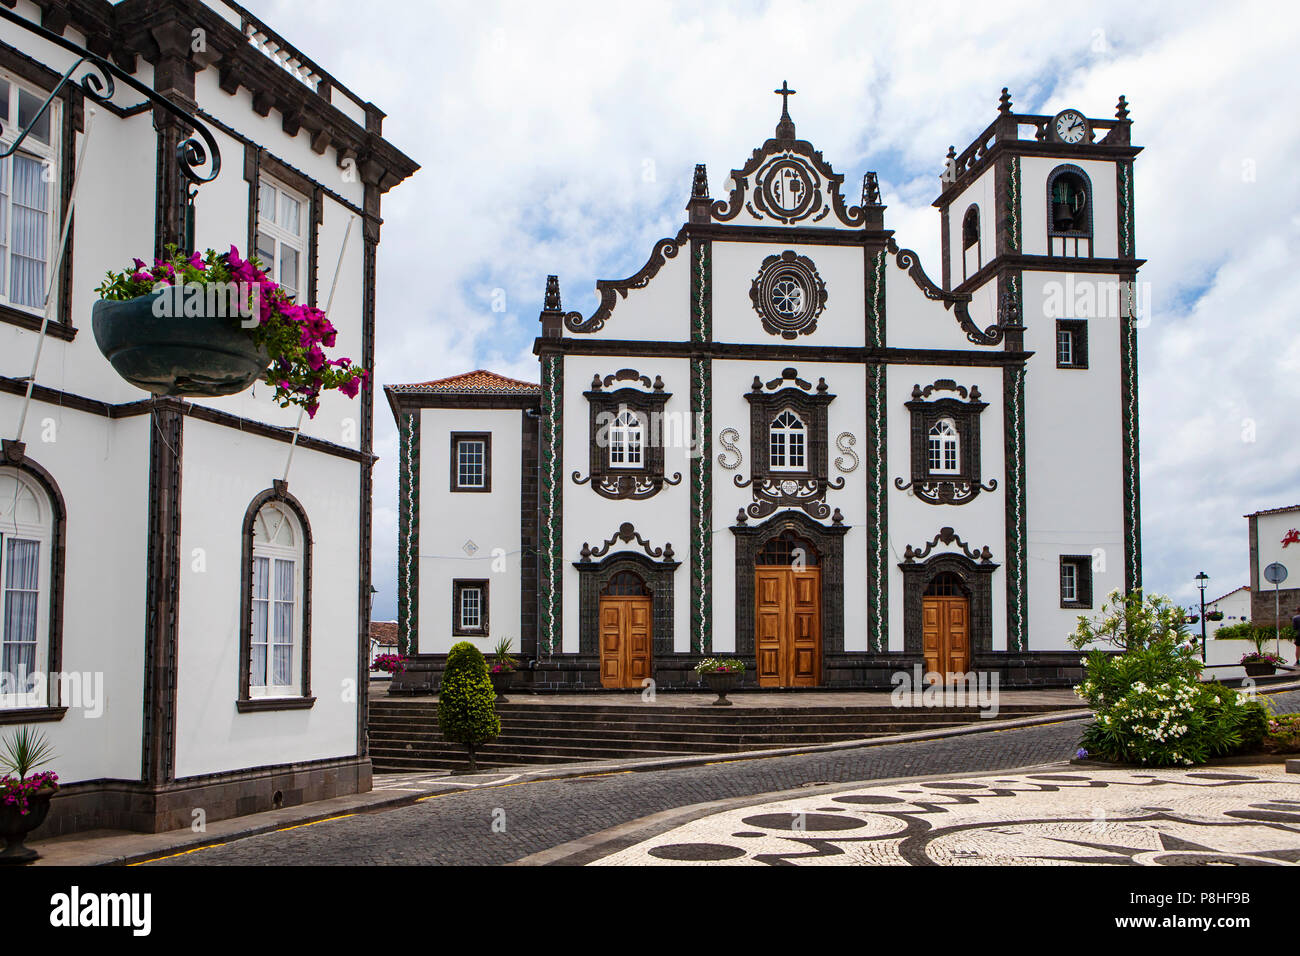 NORDESTE, PORTUGAL - JUNE 29th, 2018: The town of Nordeste, which  is the center of the north eastern area on Sao Miguel Island, Azores. Stock Photo